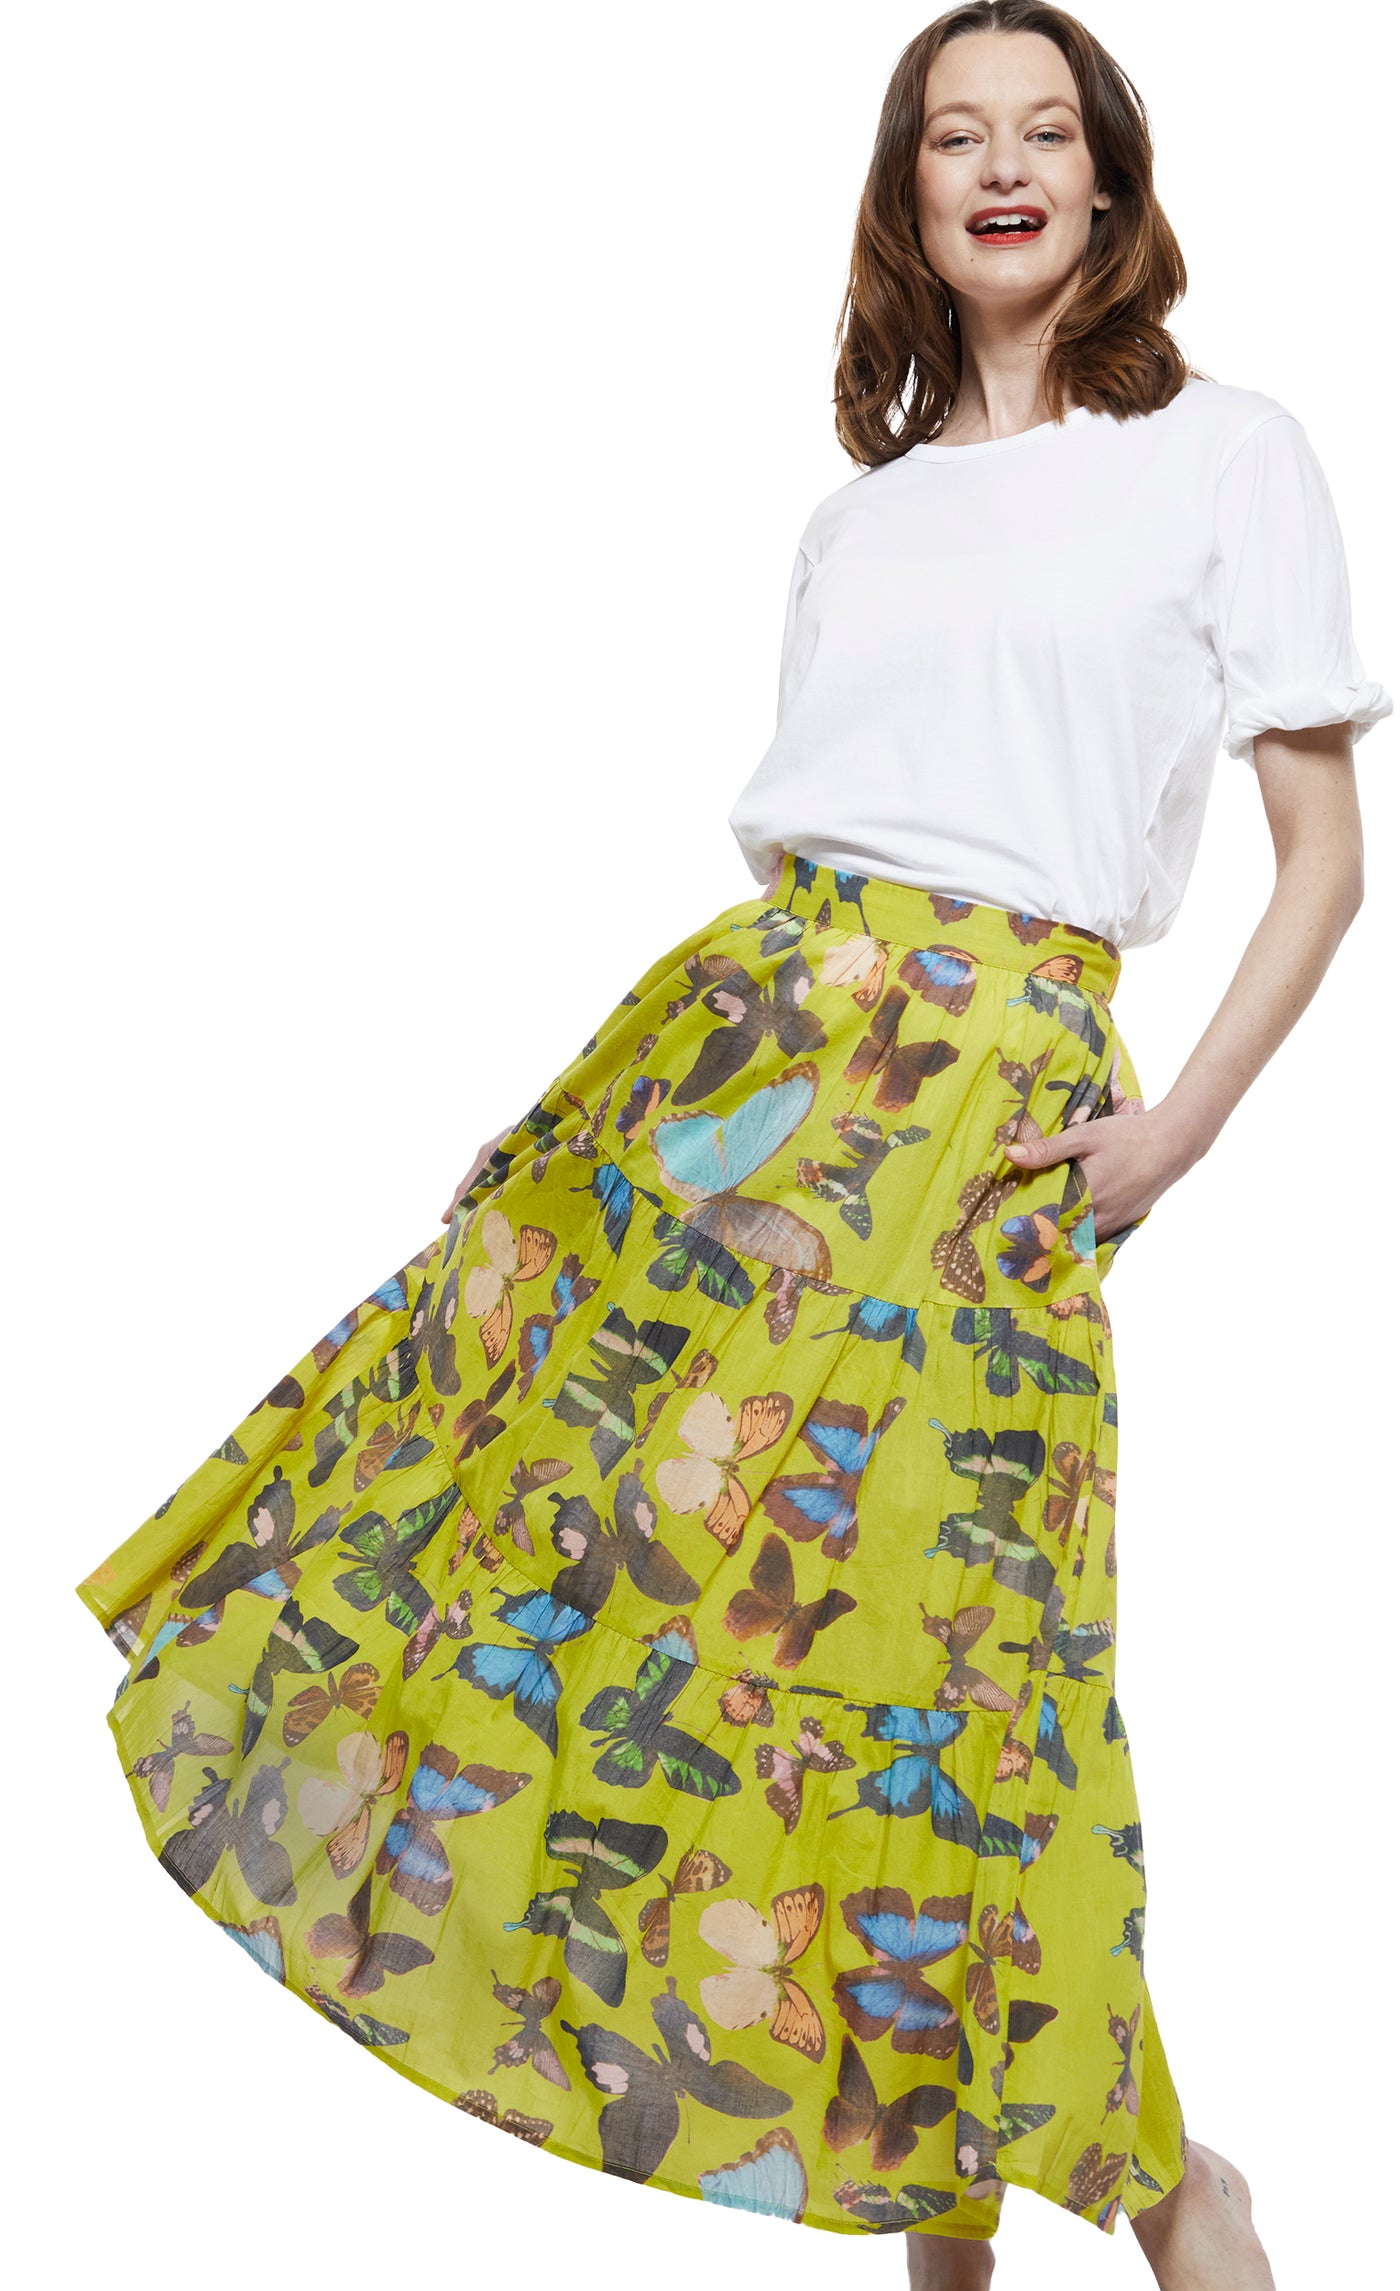 Woodstock Skirt in Chartreuse with Butterflies XS / 3000-M611